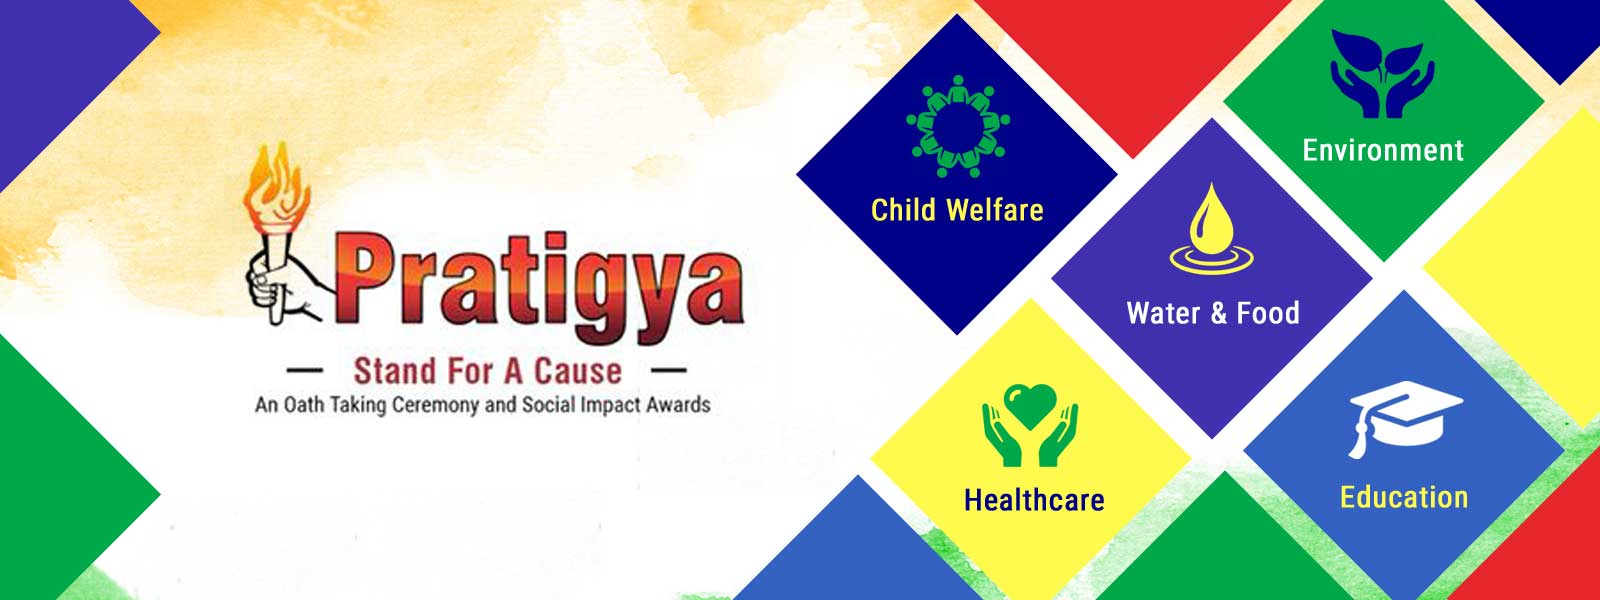 PRATIGYA - An Oath Taking Ceremony and Social Impact Awards